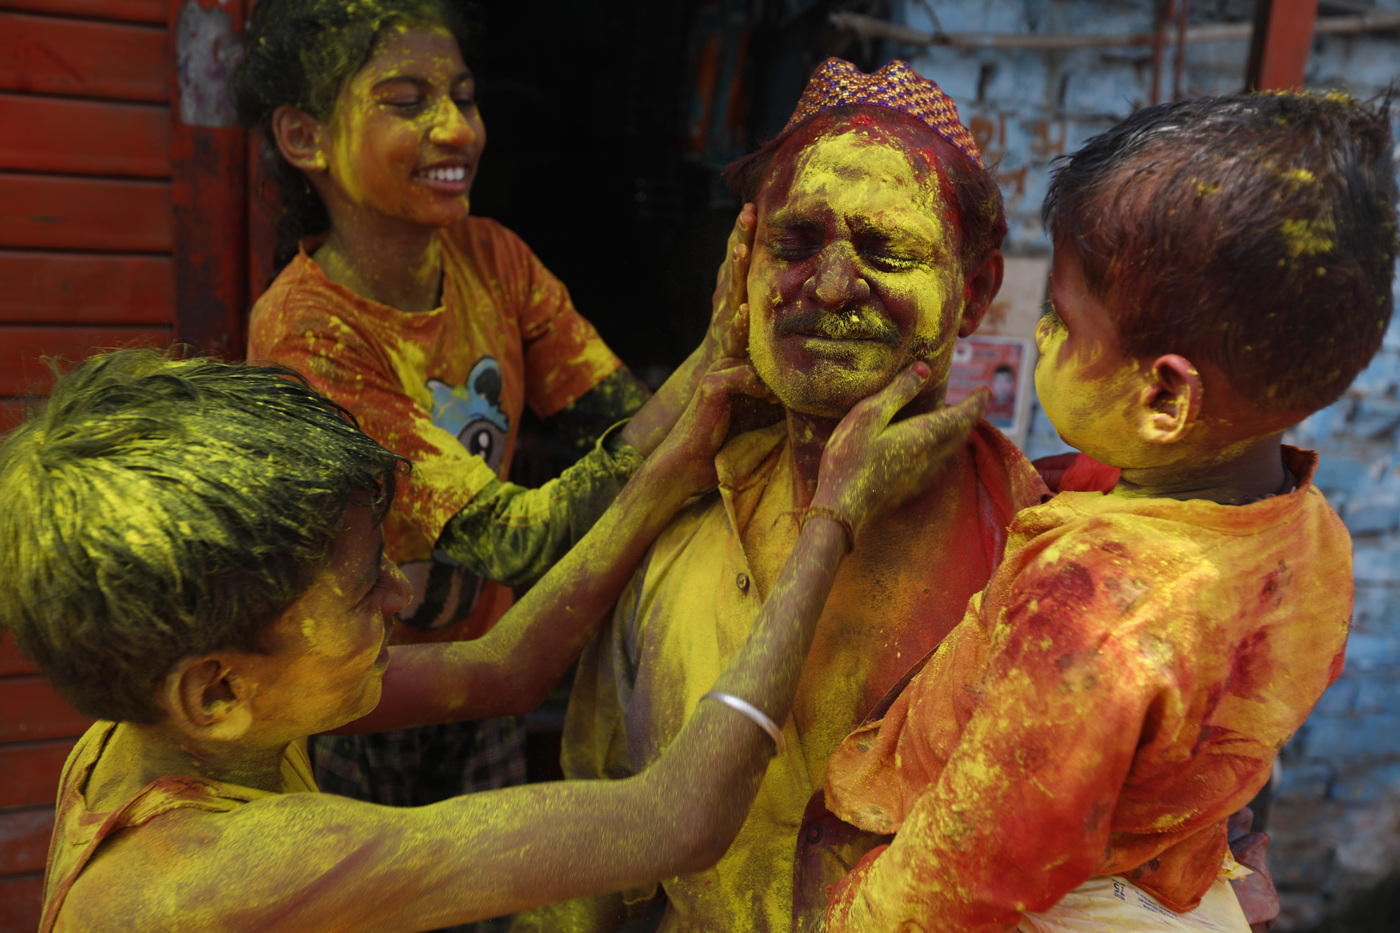 People celebrate Holi in Prayagraj, in the northern Indian state of Uttar Pradesh, Friday, March 18, 2022. The festival, a celebration of warm weather, good harvests and the defeat of evil, brings out millions of people, from toddlers to the elderly, to throw powder at one another and play with water balloons and squirt guns. (AP Photo/Rajesh Kumar Singh)